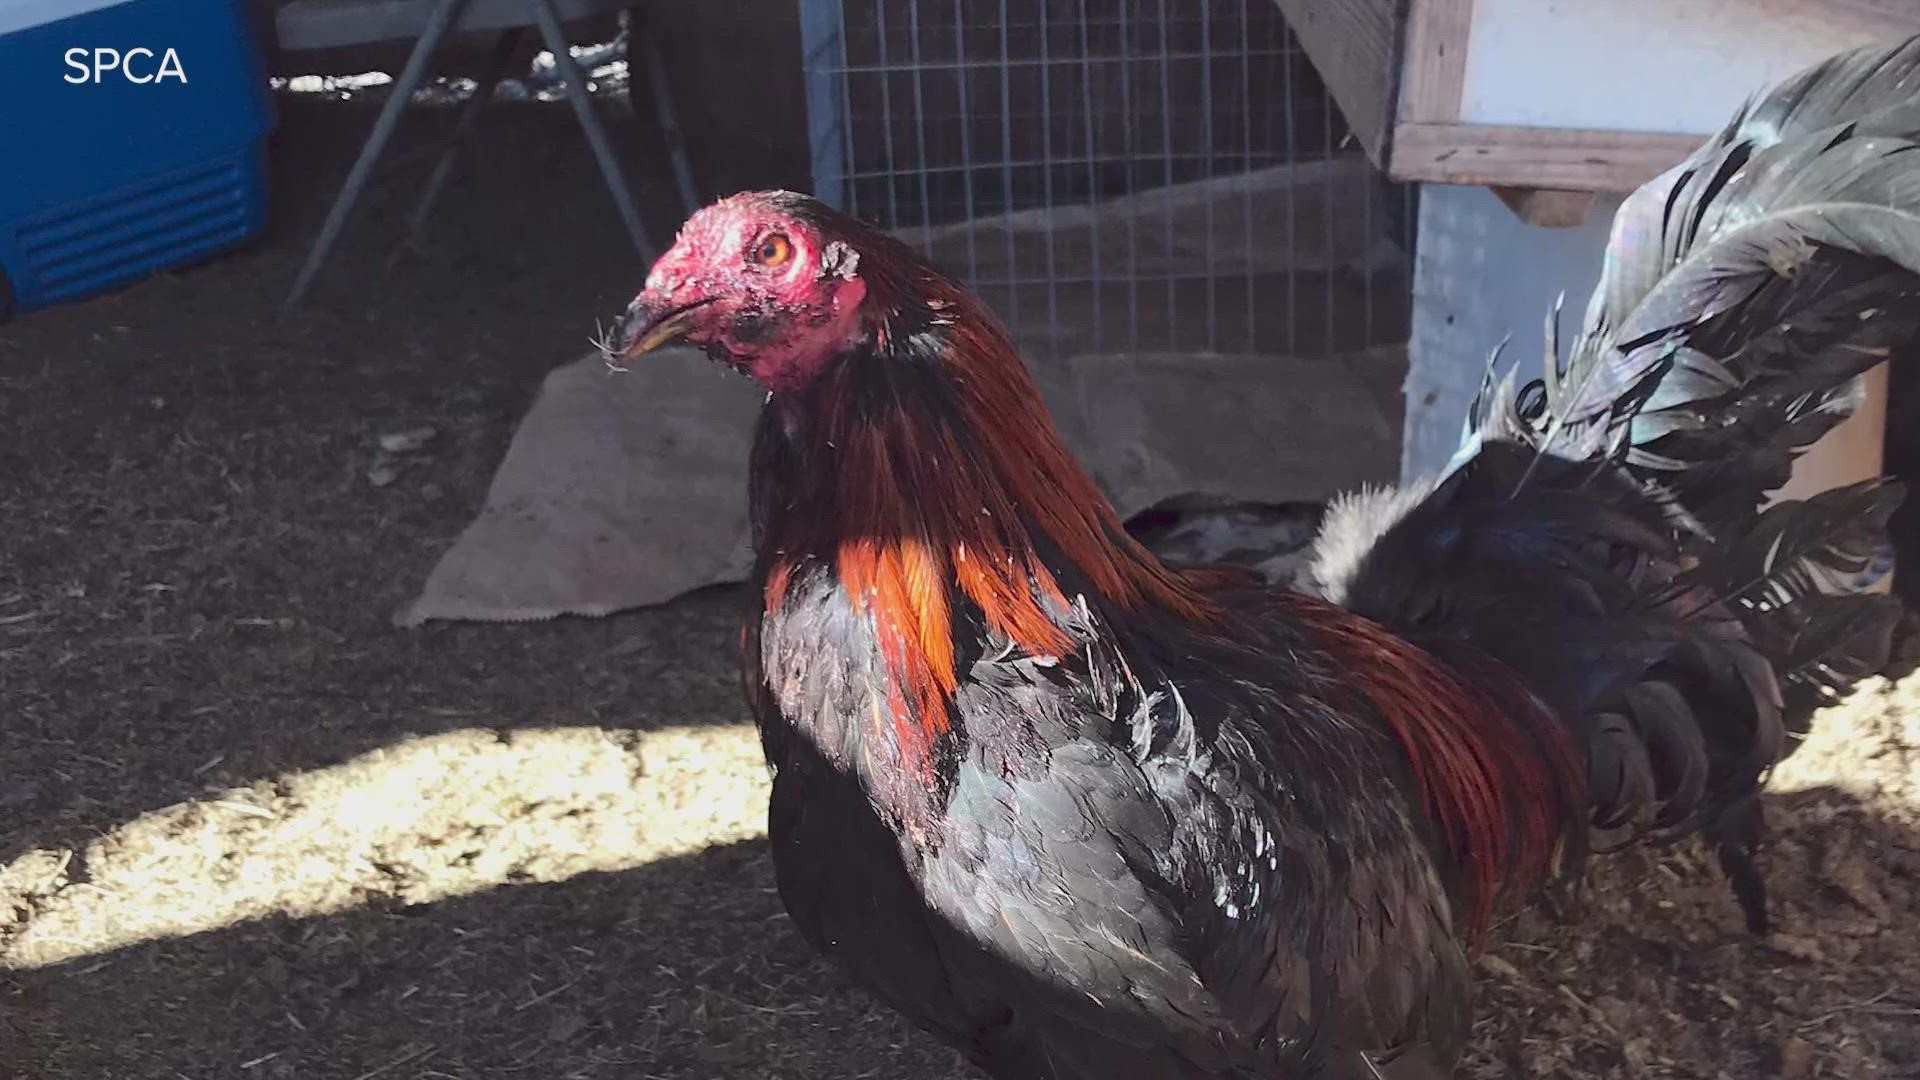 According to the SPCA of Texas, the organization took custody of 123 roosters, eight hens and two deceased roosters.